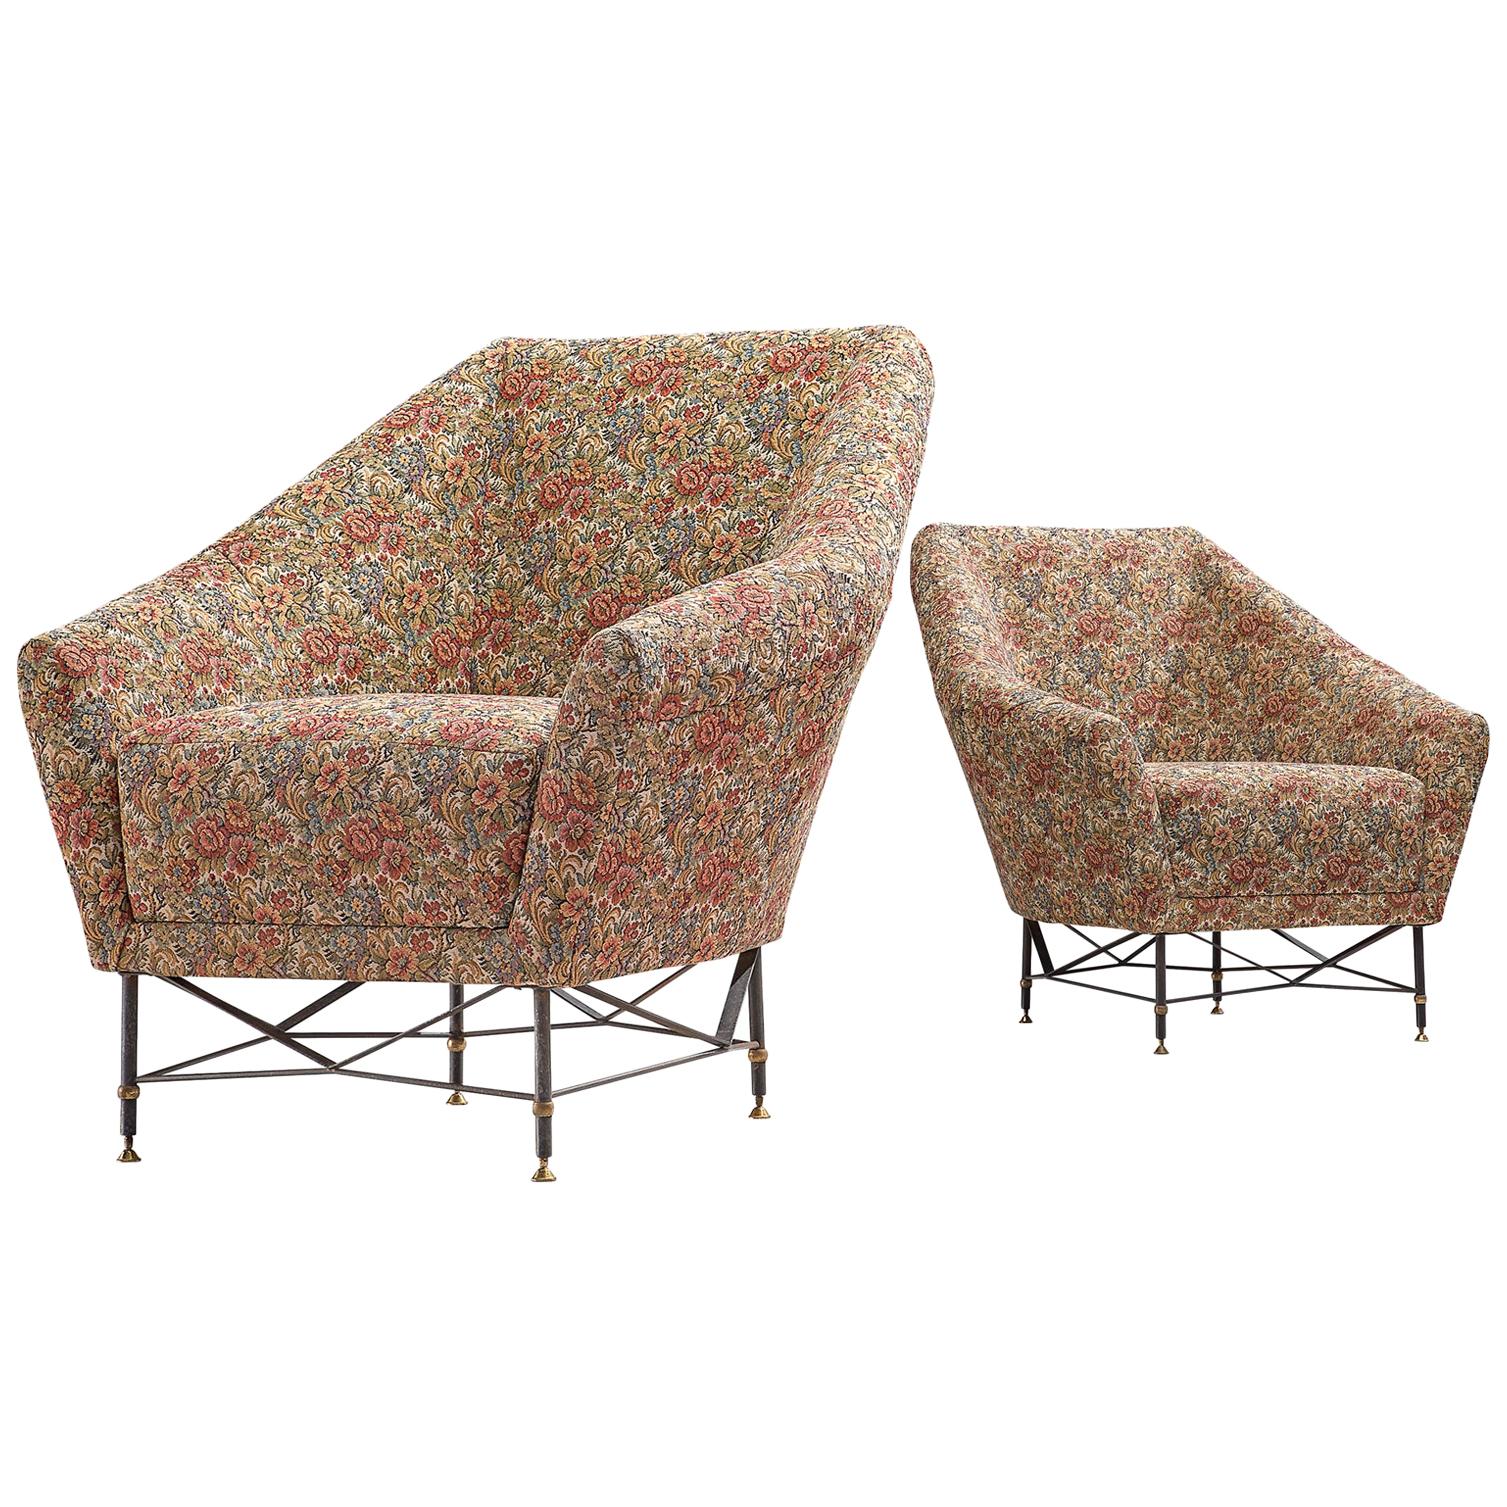 Italian Pair of Lounge Chairs in Floral Upholstery